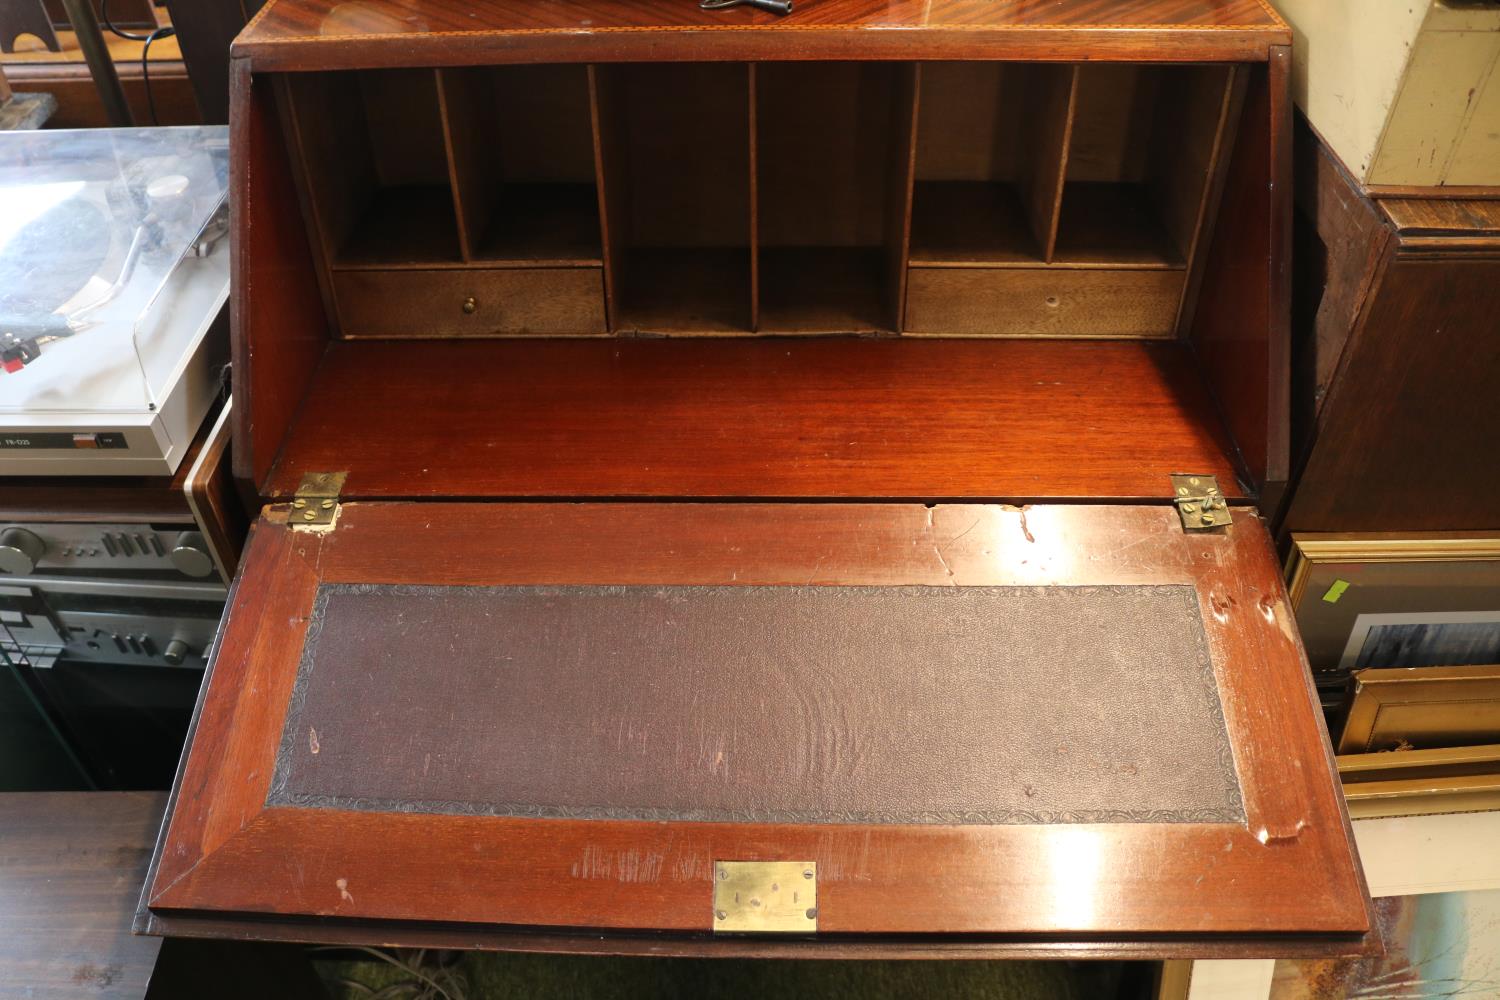 Edwardian Fall Front bureau with brass drop handles over cabriole legs - Image 2 of 2